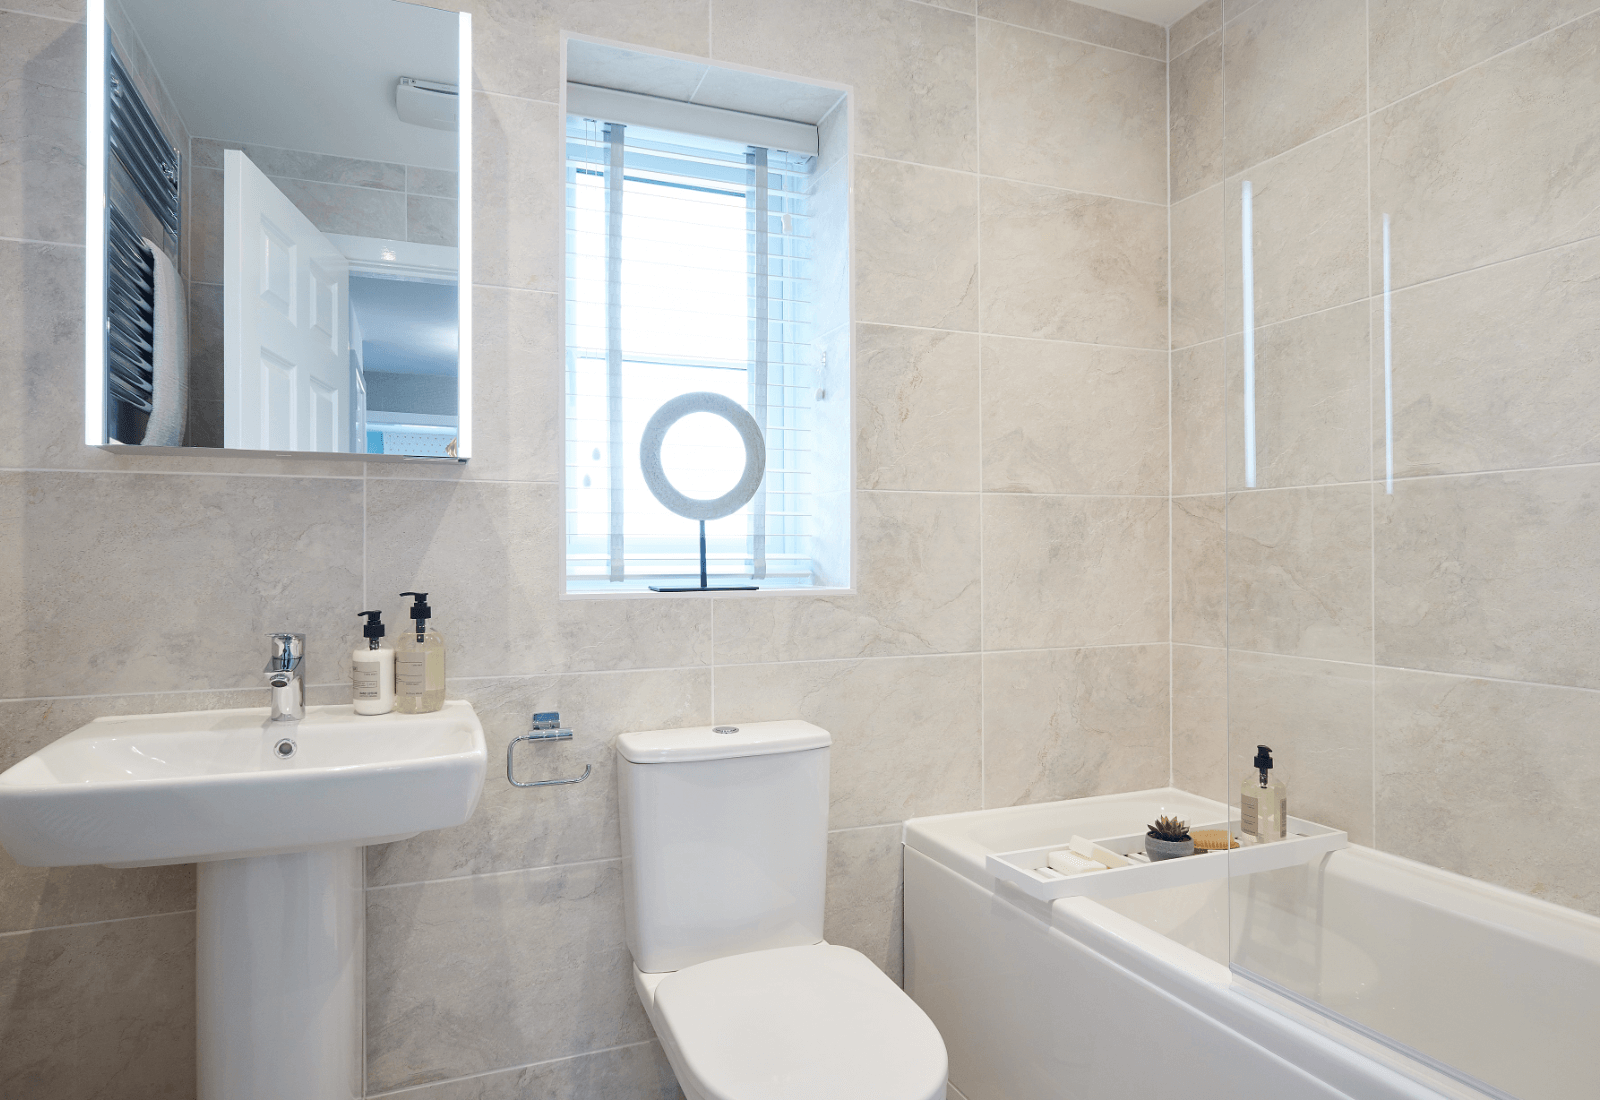 Typical Baycliffe Show Home - Bathroom